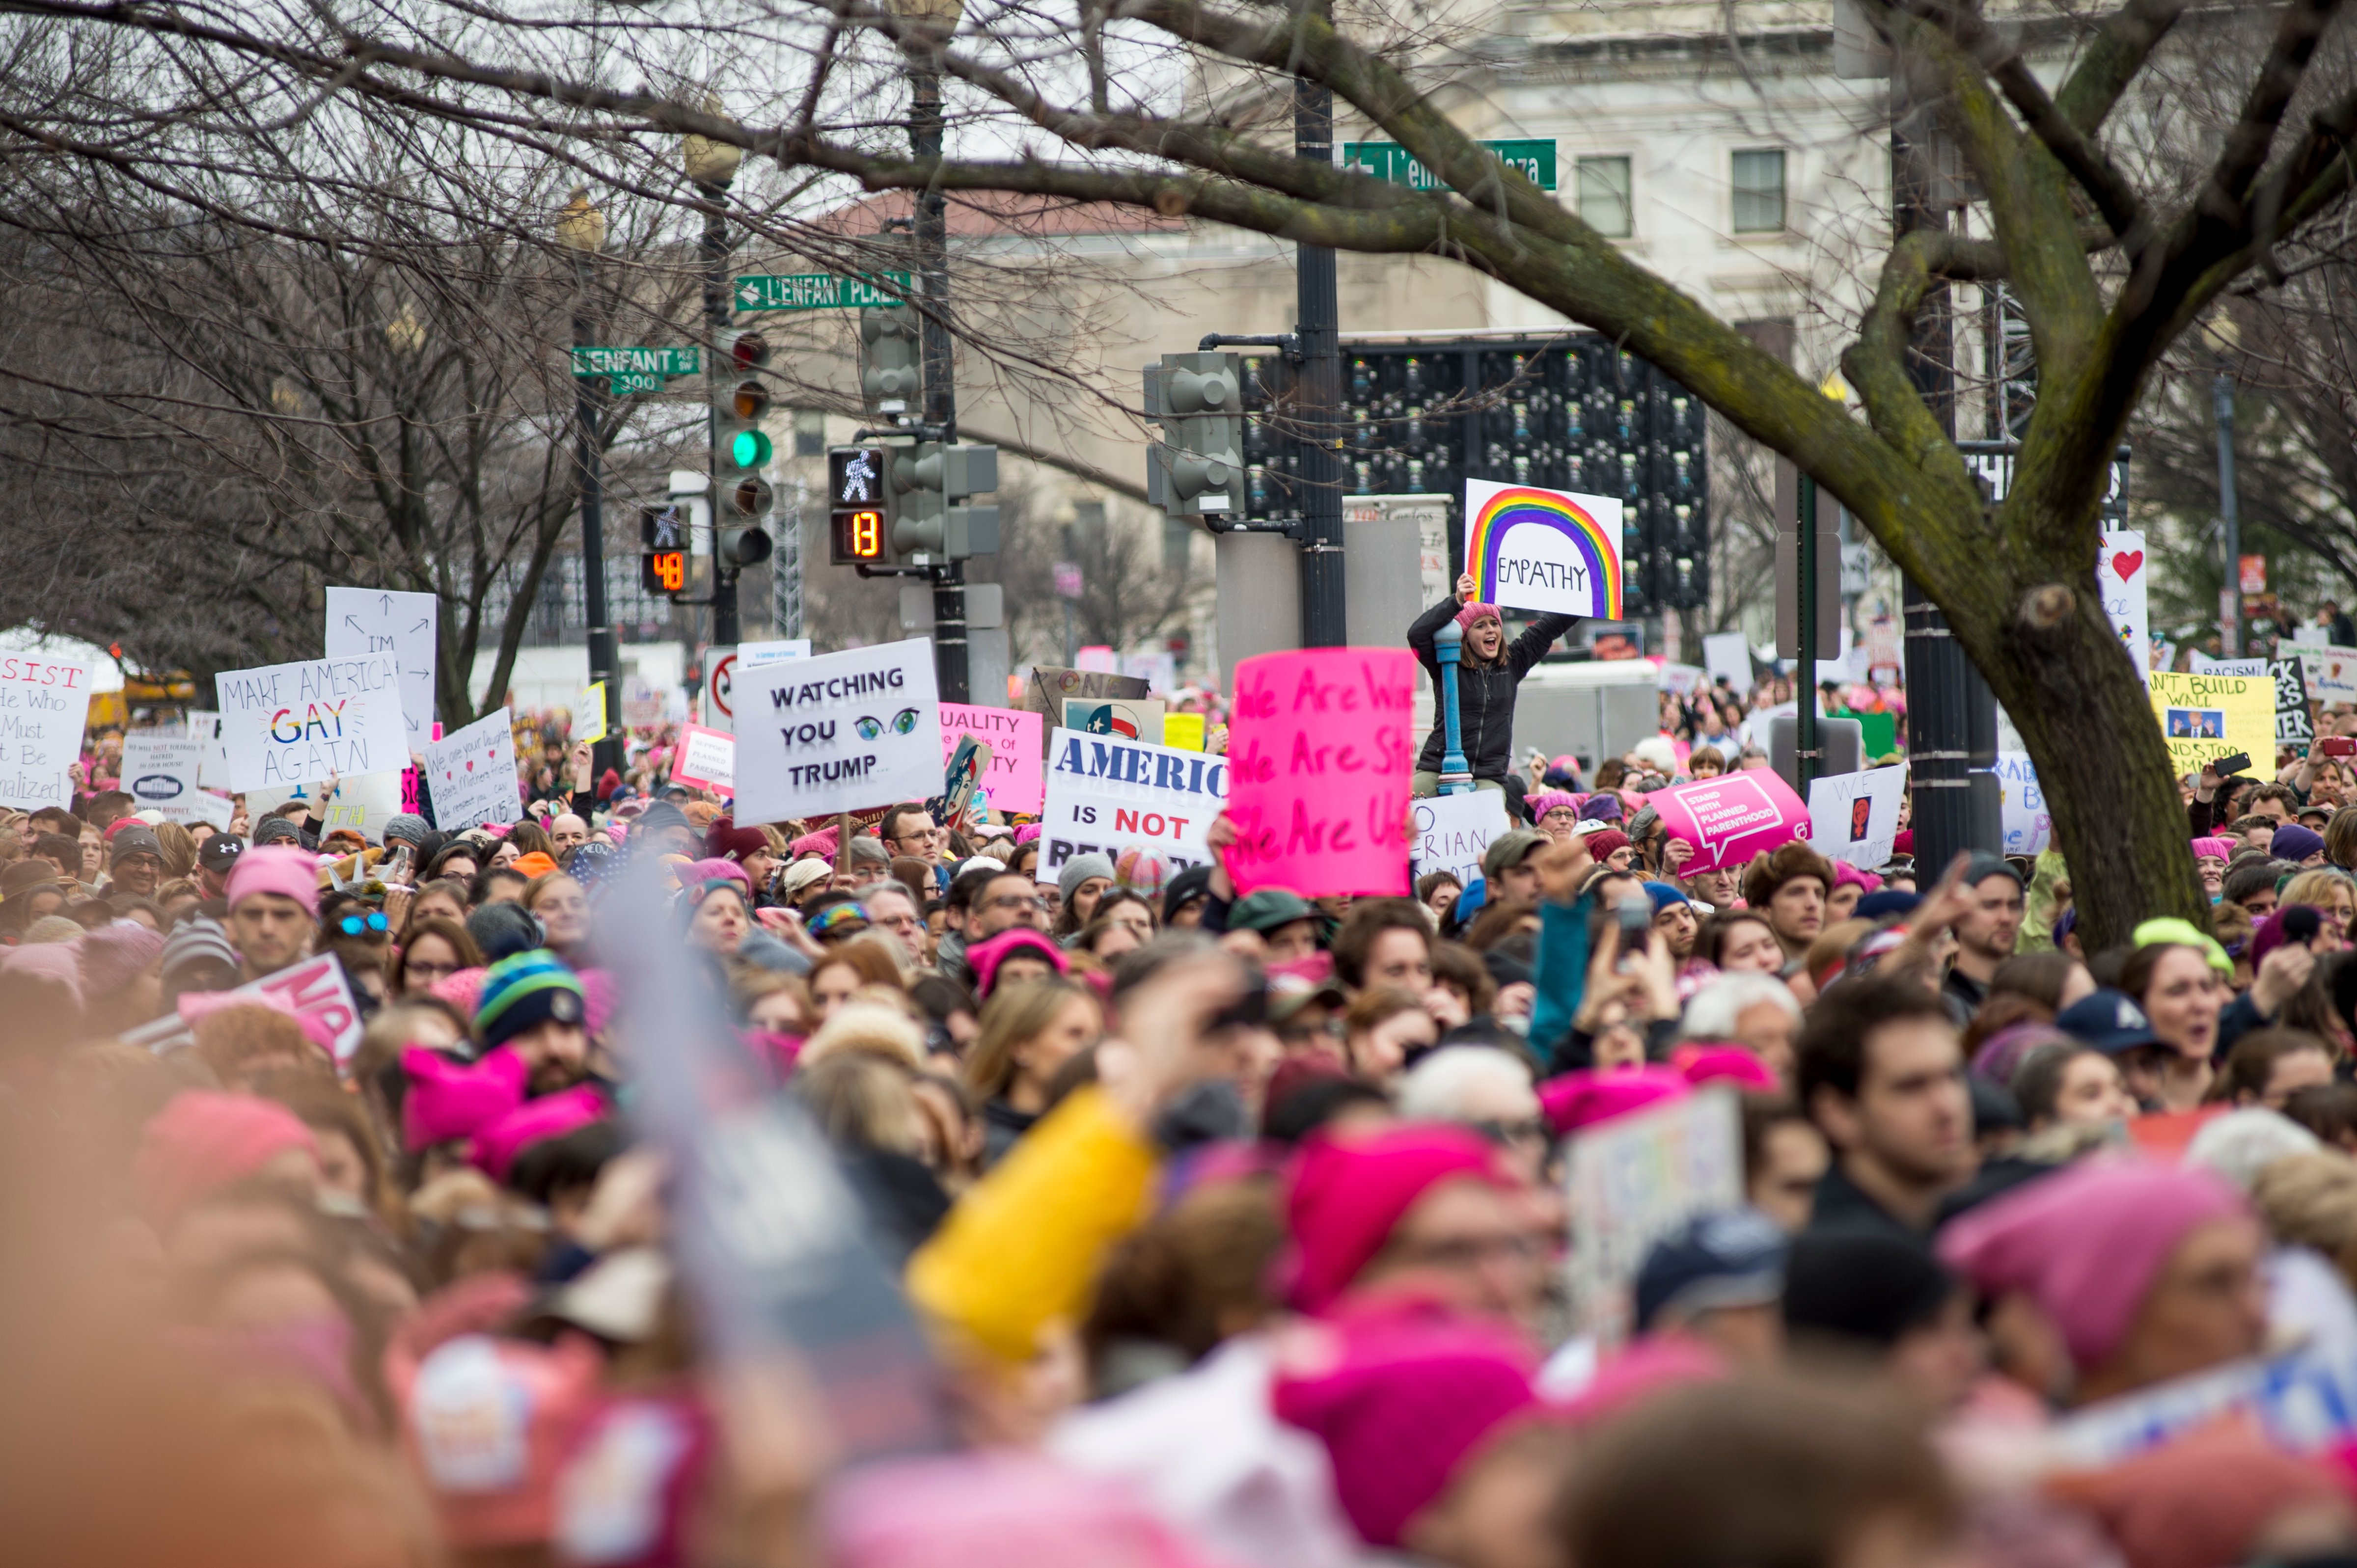 Crowds gather for the rally on Independence Ave next to the National Mall at the Women's March on Washington on Jan. 21, 2017 in Washington, DC. (Ann Hermes—Christian Science Monitor/Getty Images)